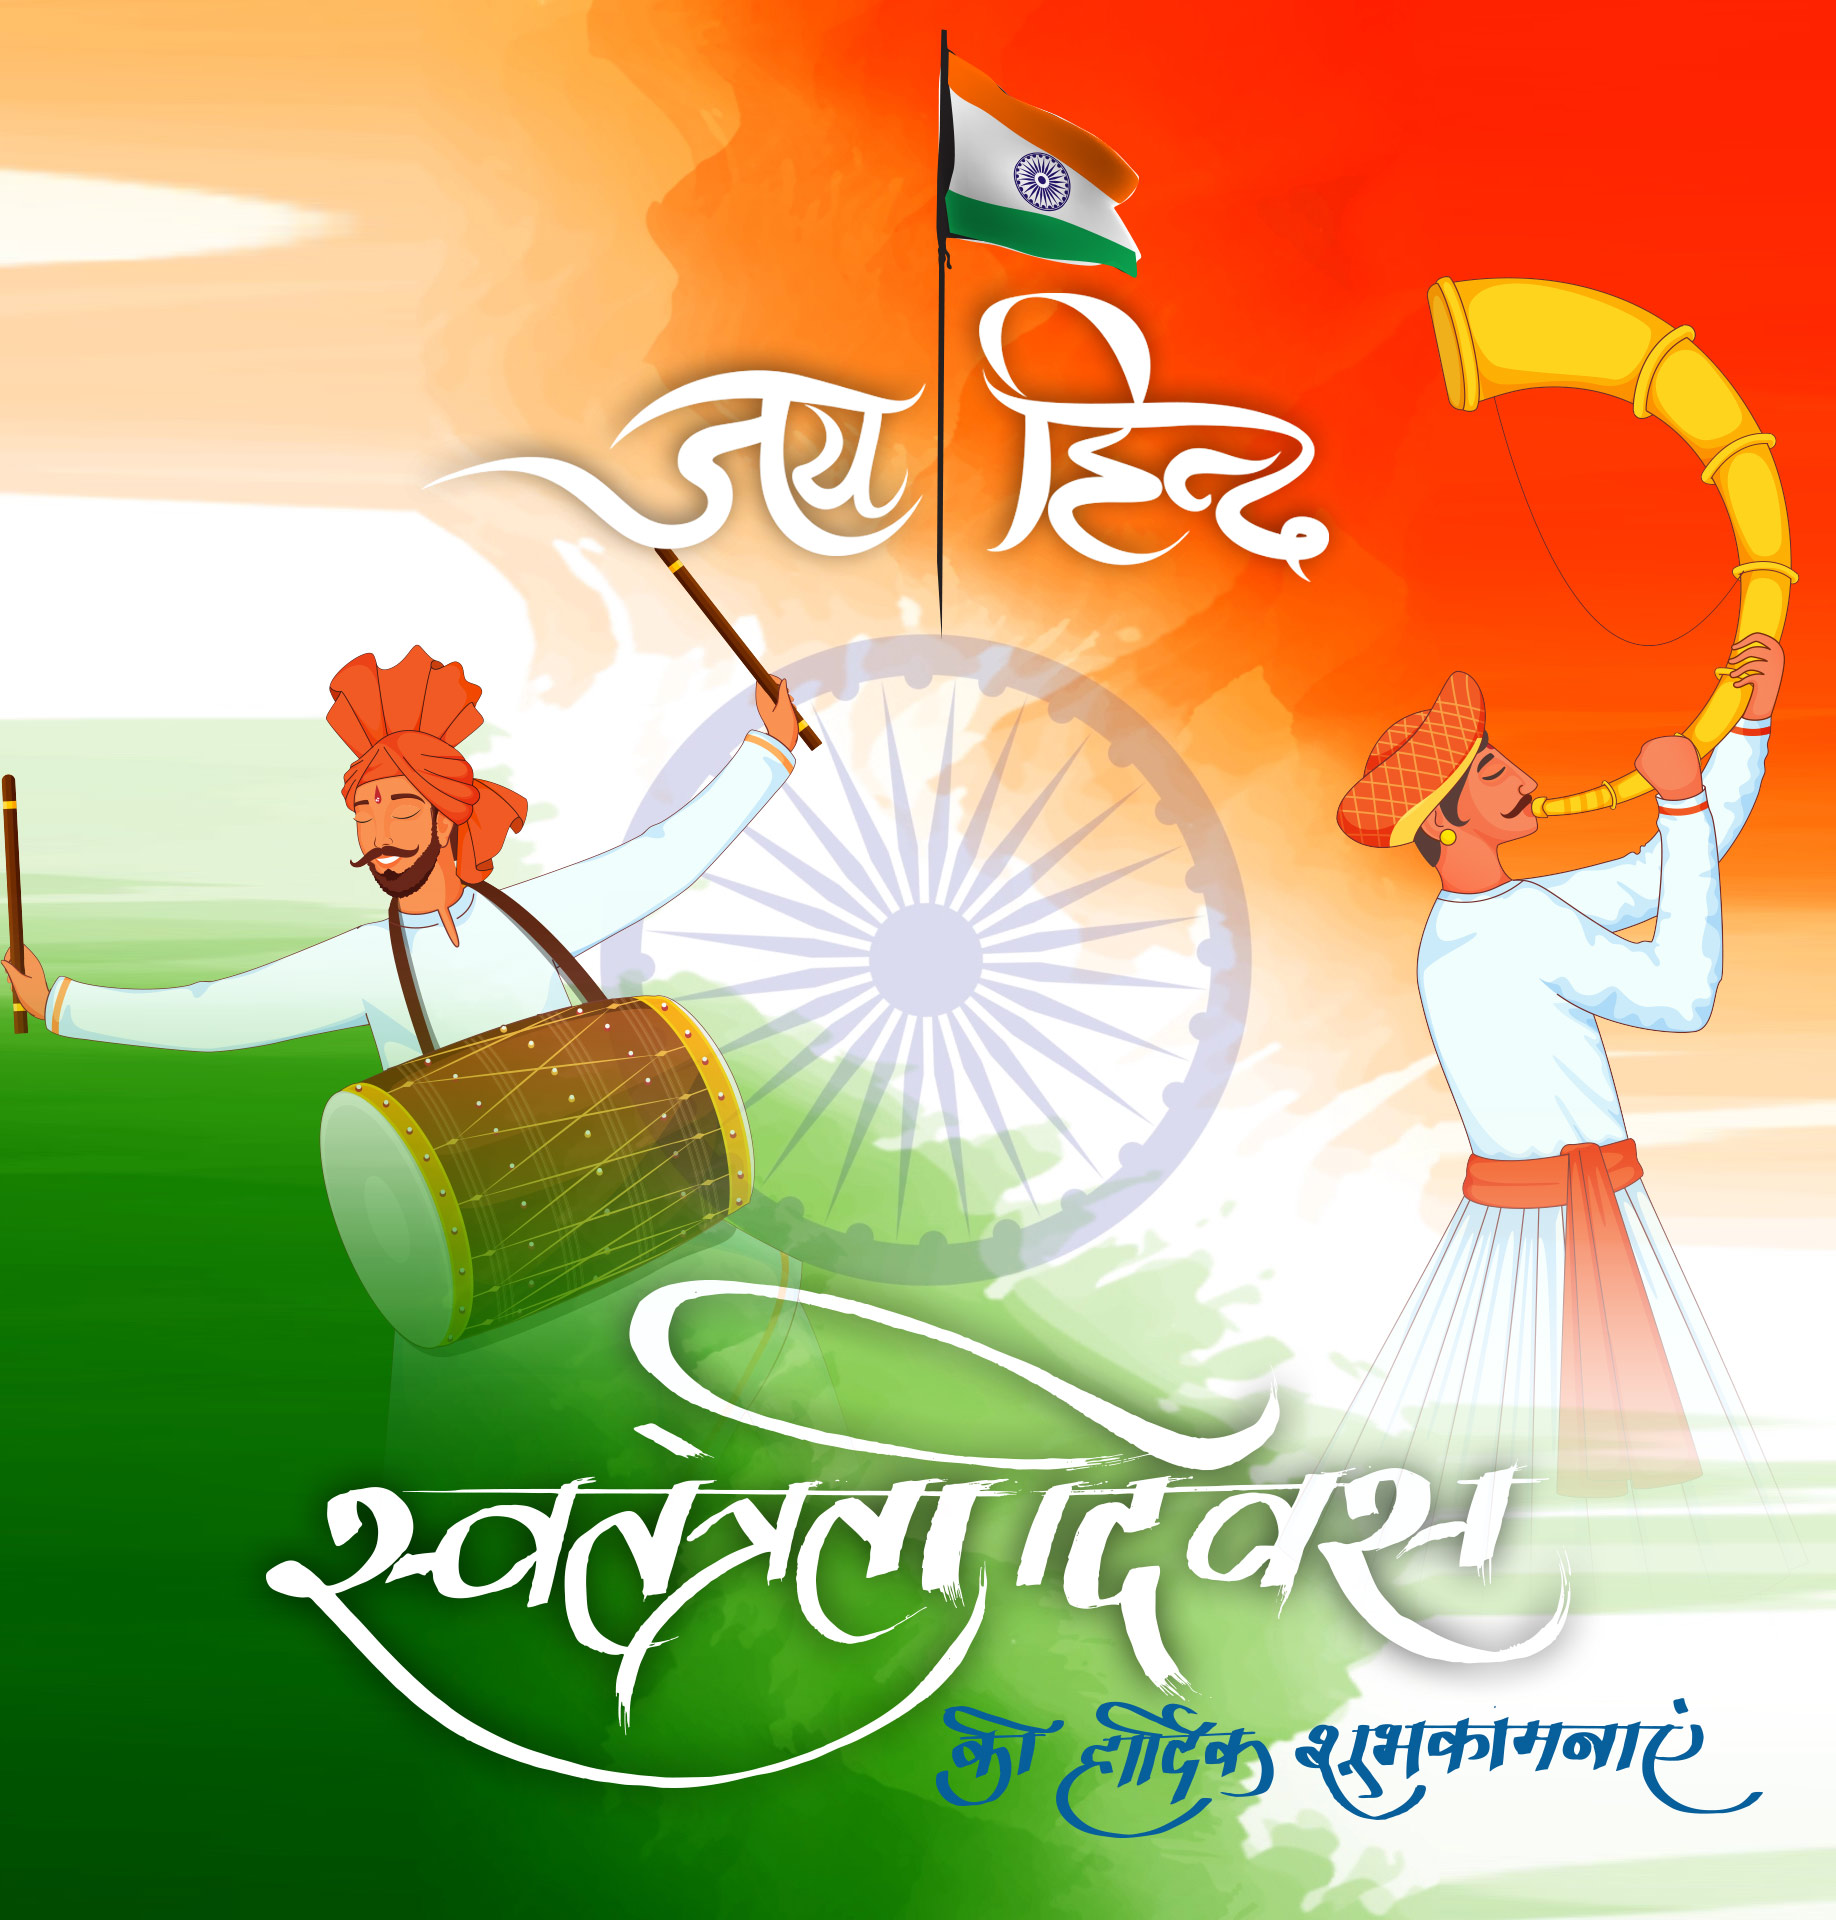 Independence day HD wallpaper - Indian flag 15th August greetings, wishes and images